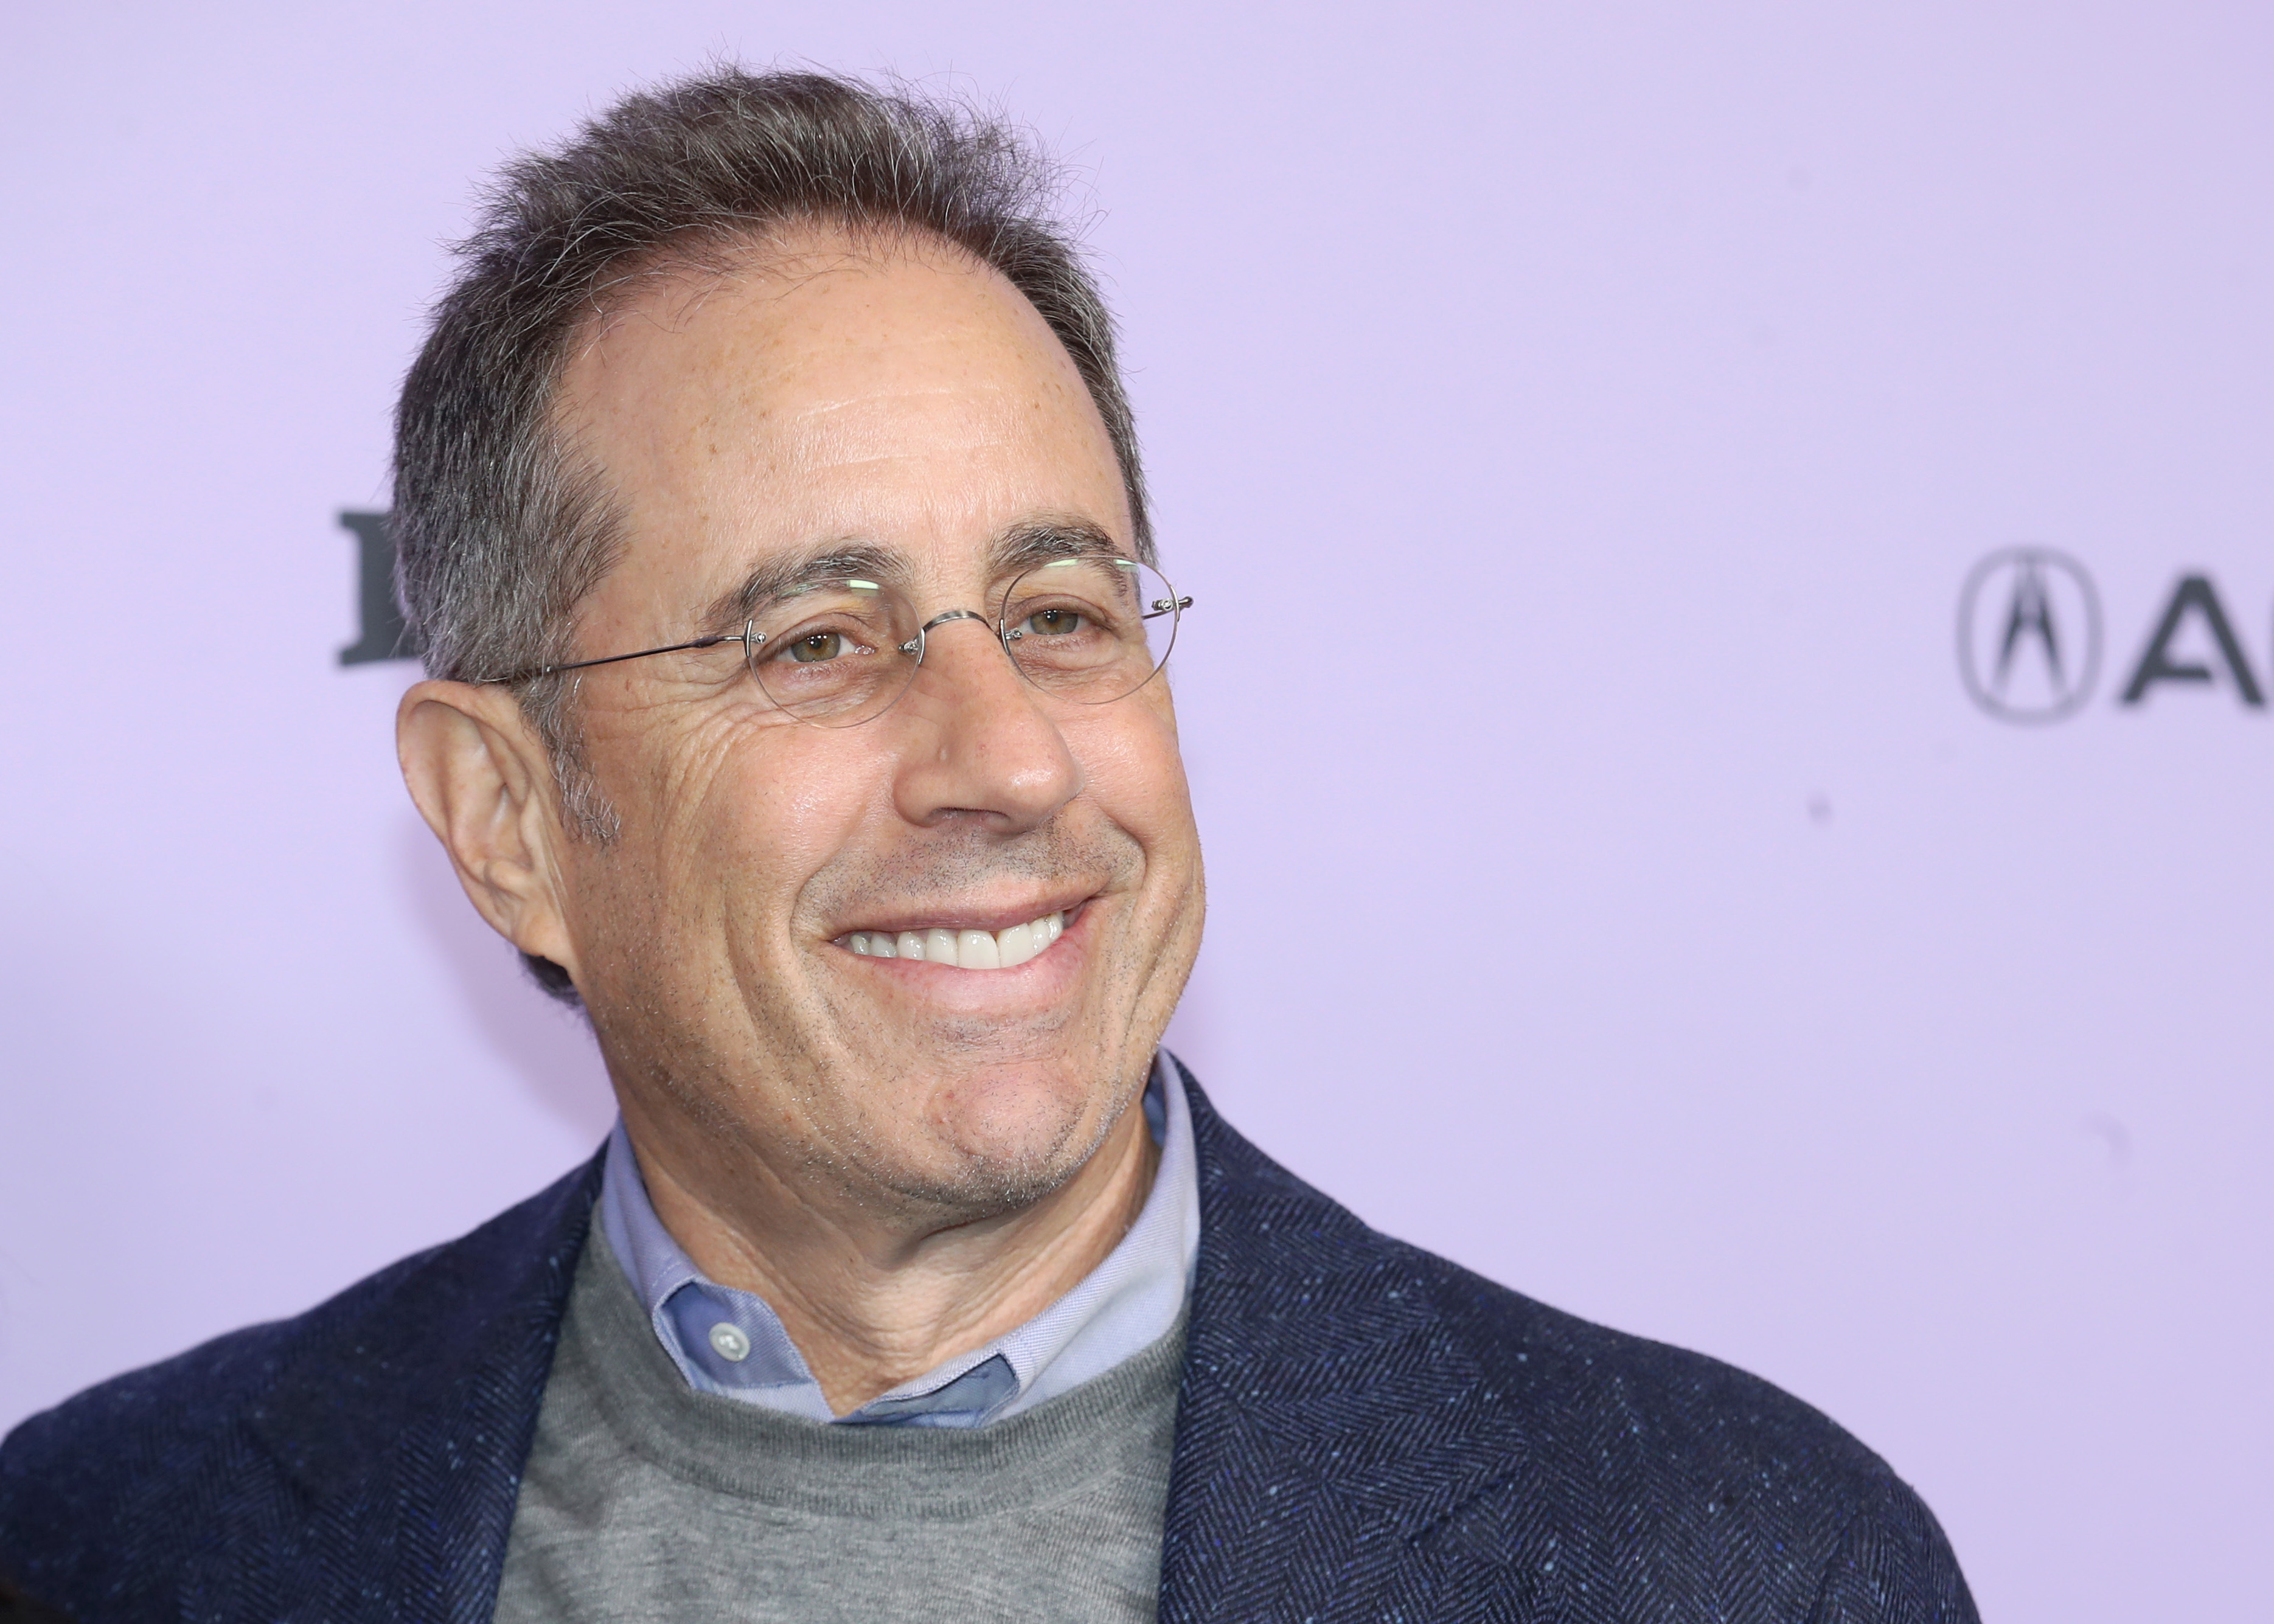 Jerry Seinfeld says the ‘extreme left’ and ‘PC crap’ killed TV comedy